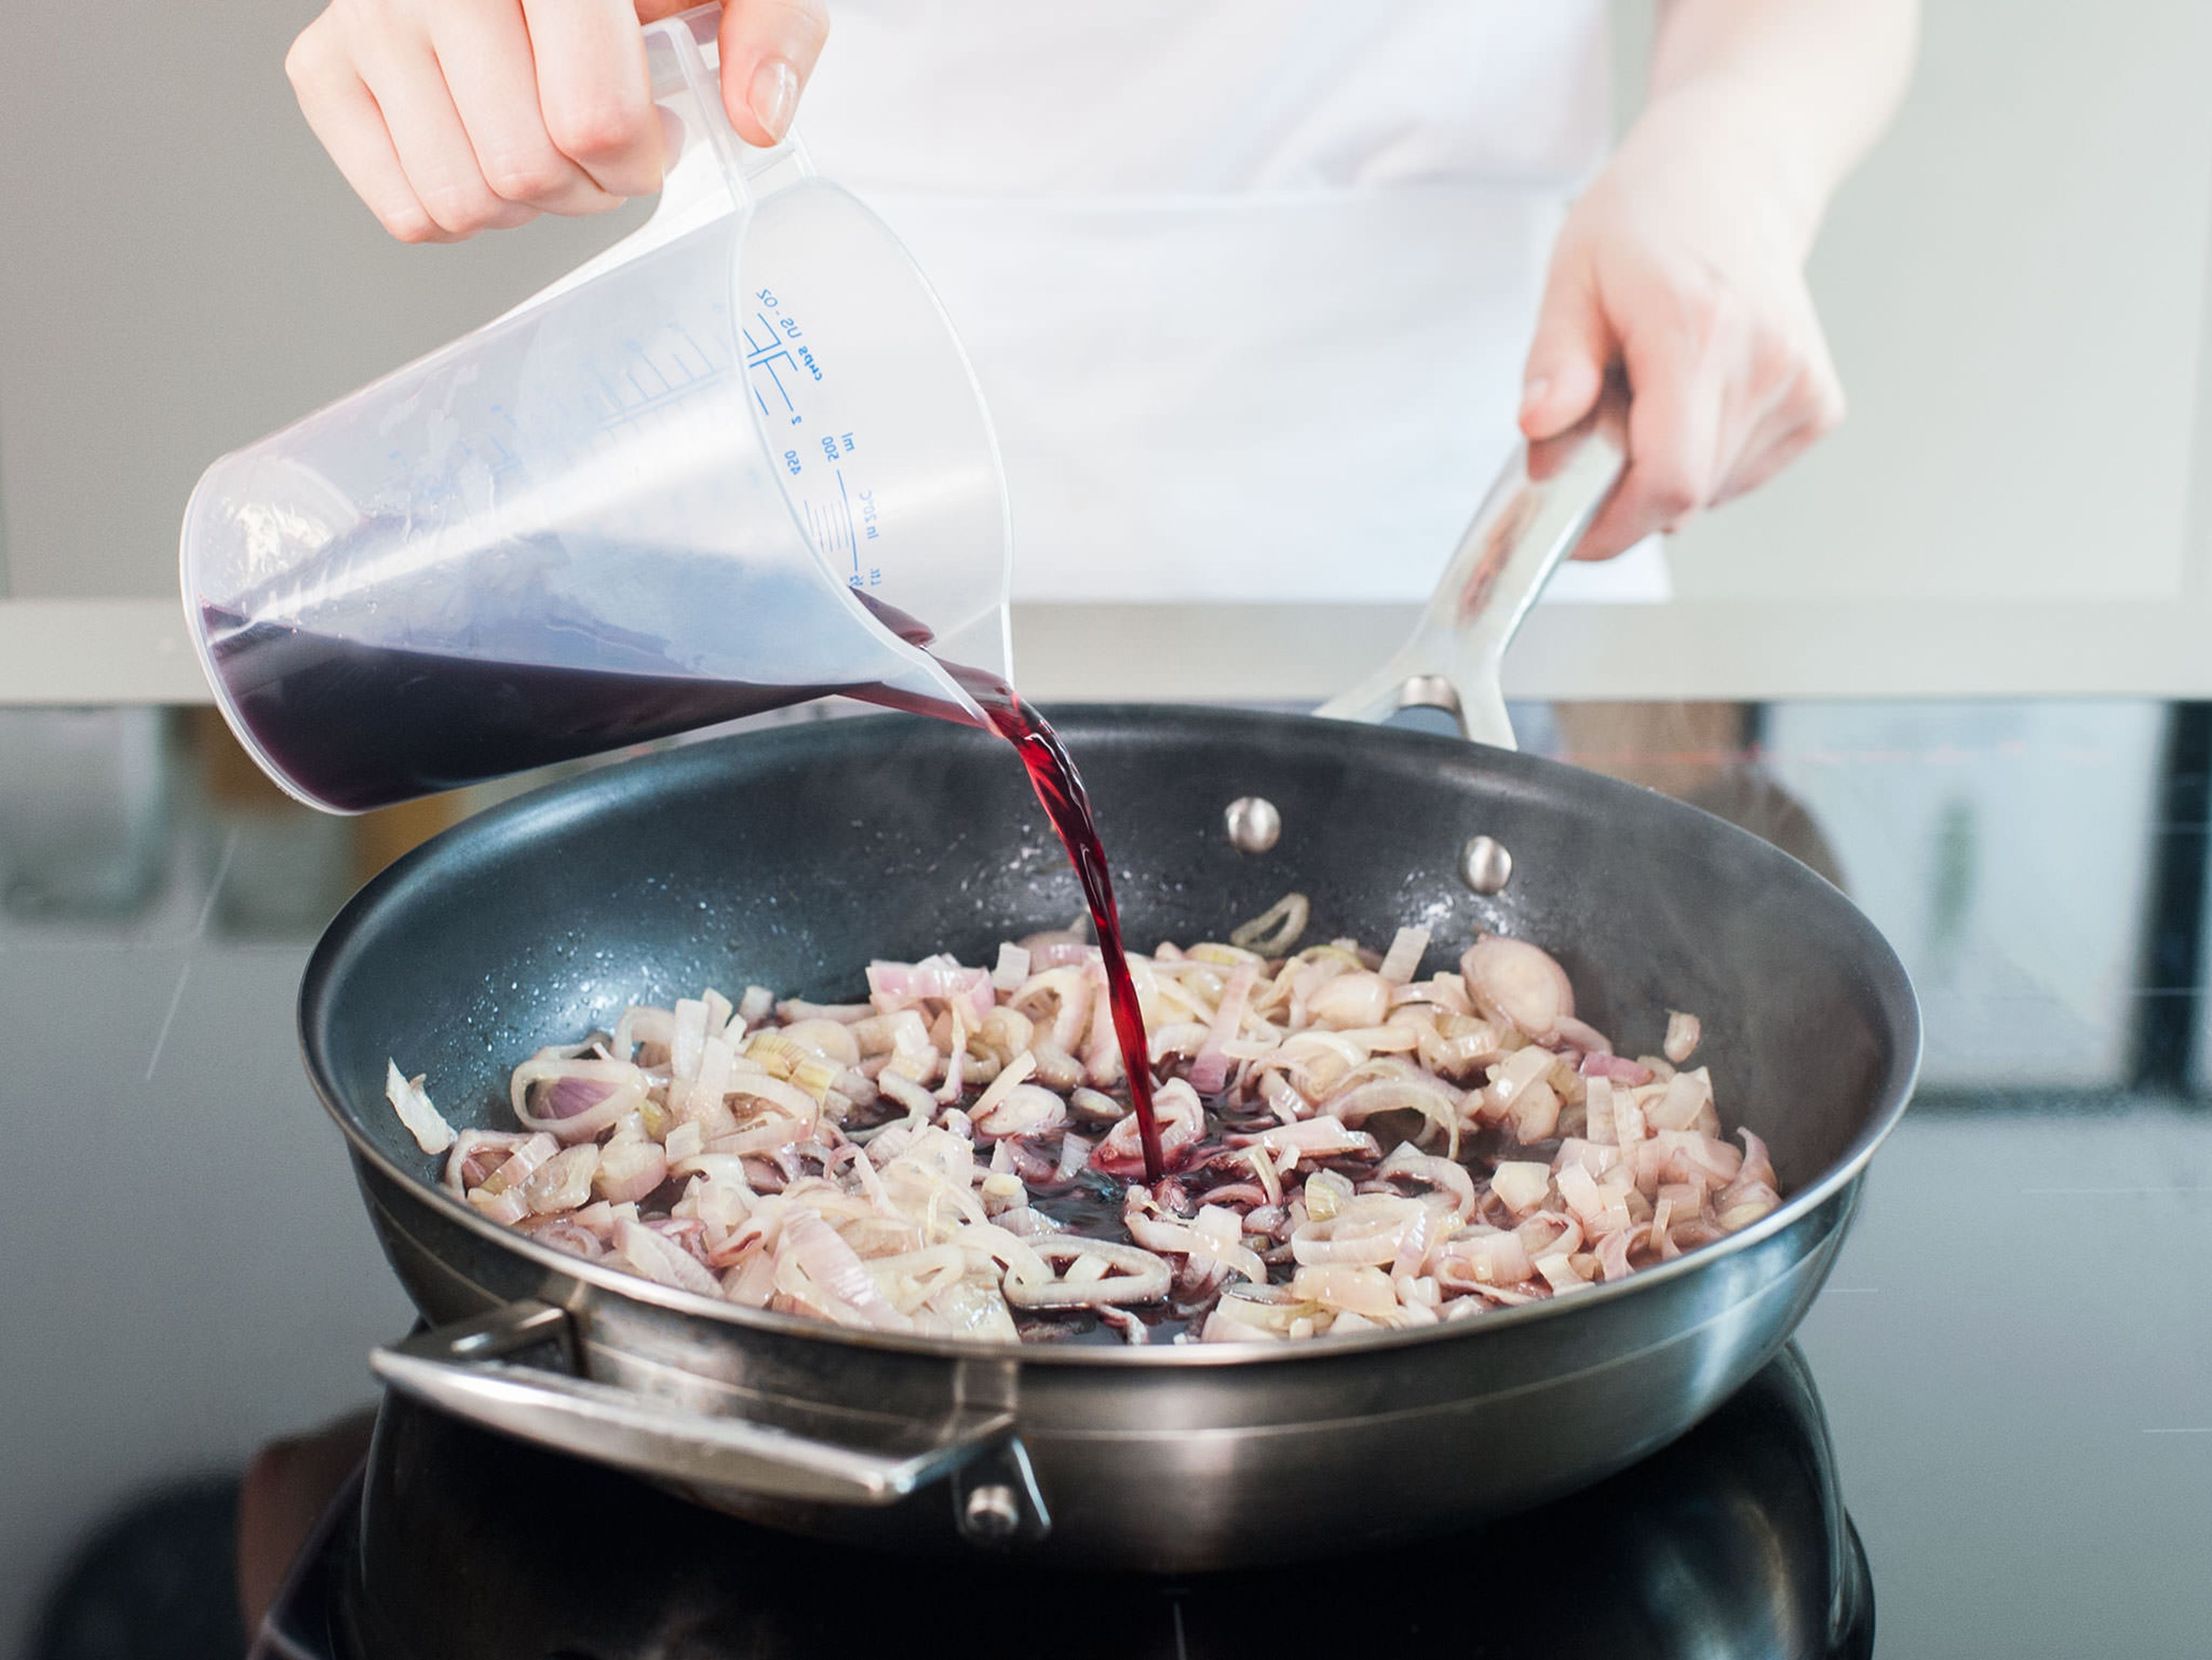 Sauté shallots until soft and fragrant, then add port wine and let reduce until only about ¼ of it remains.